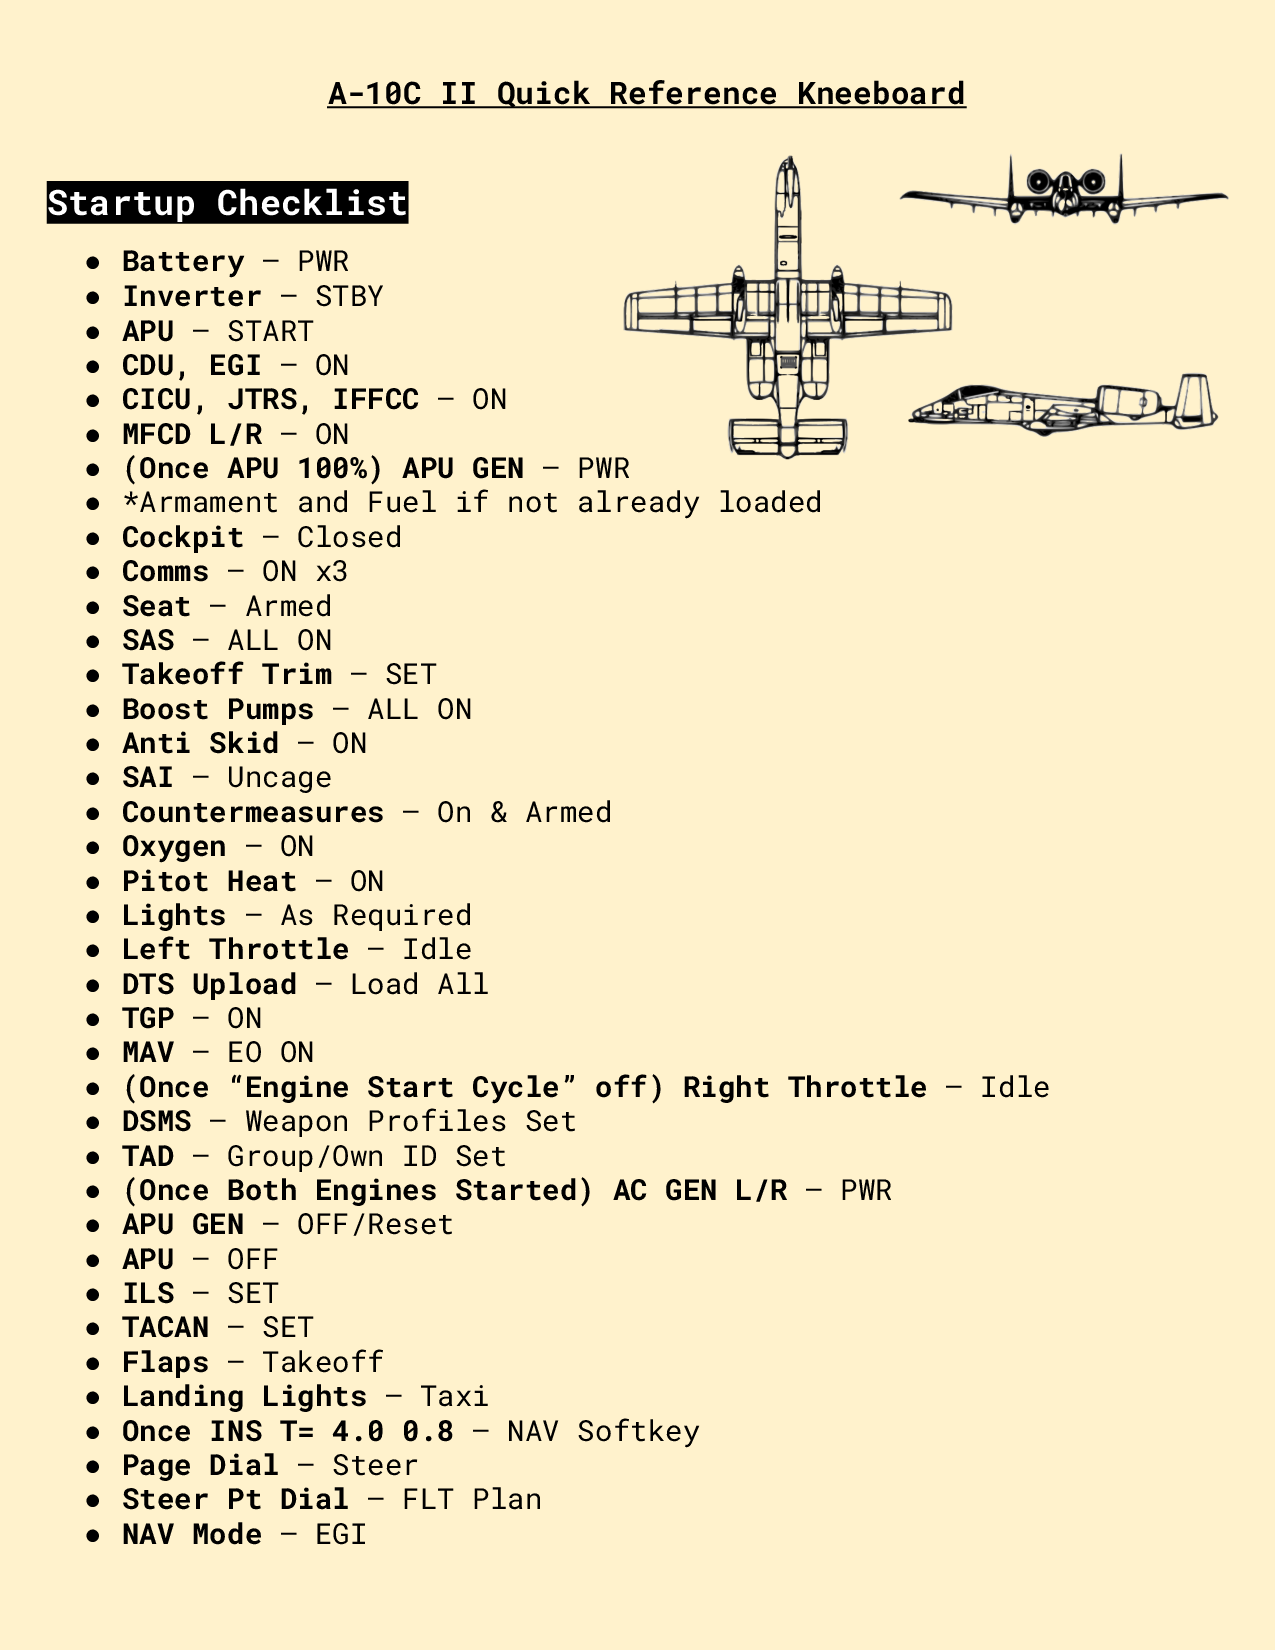 A-10C II Warthog Quick Reference Kneeboard and Checklists By: Hayden